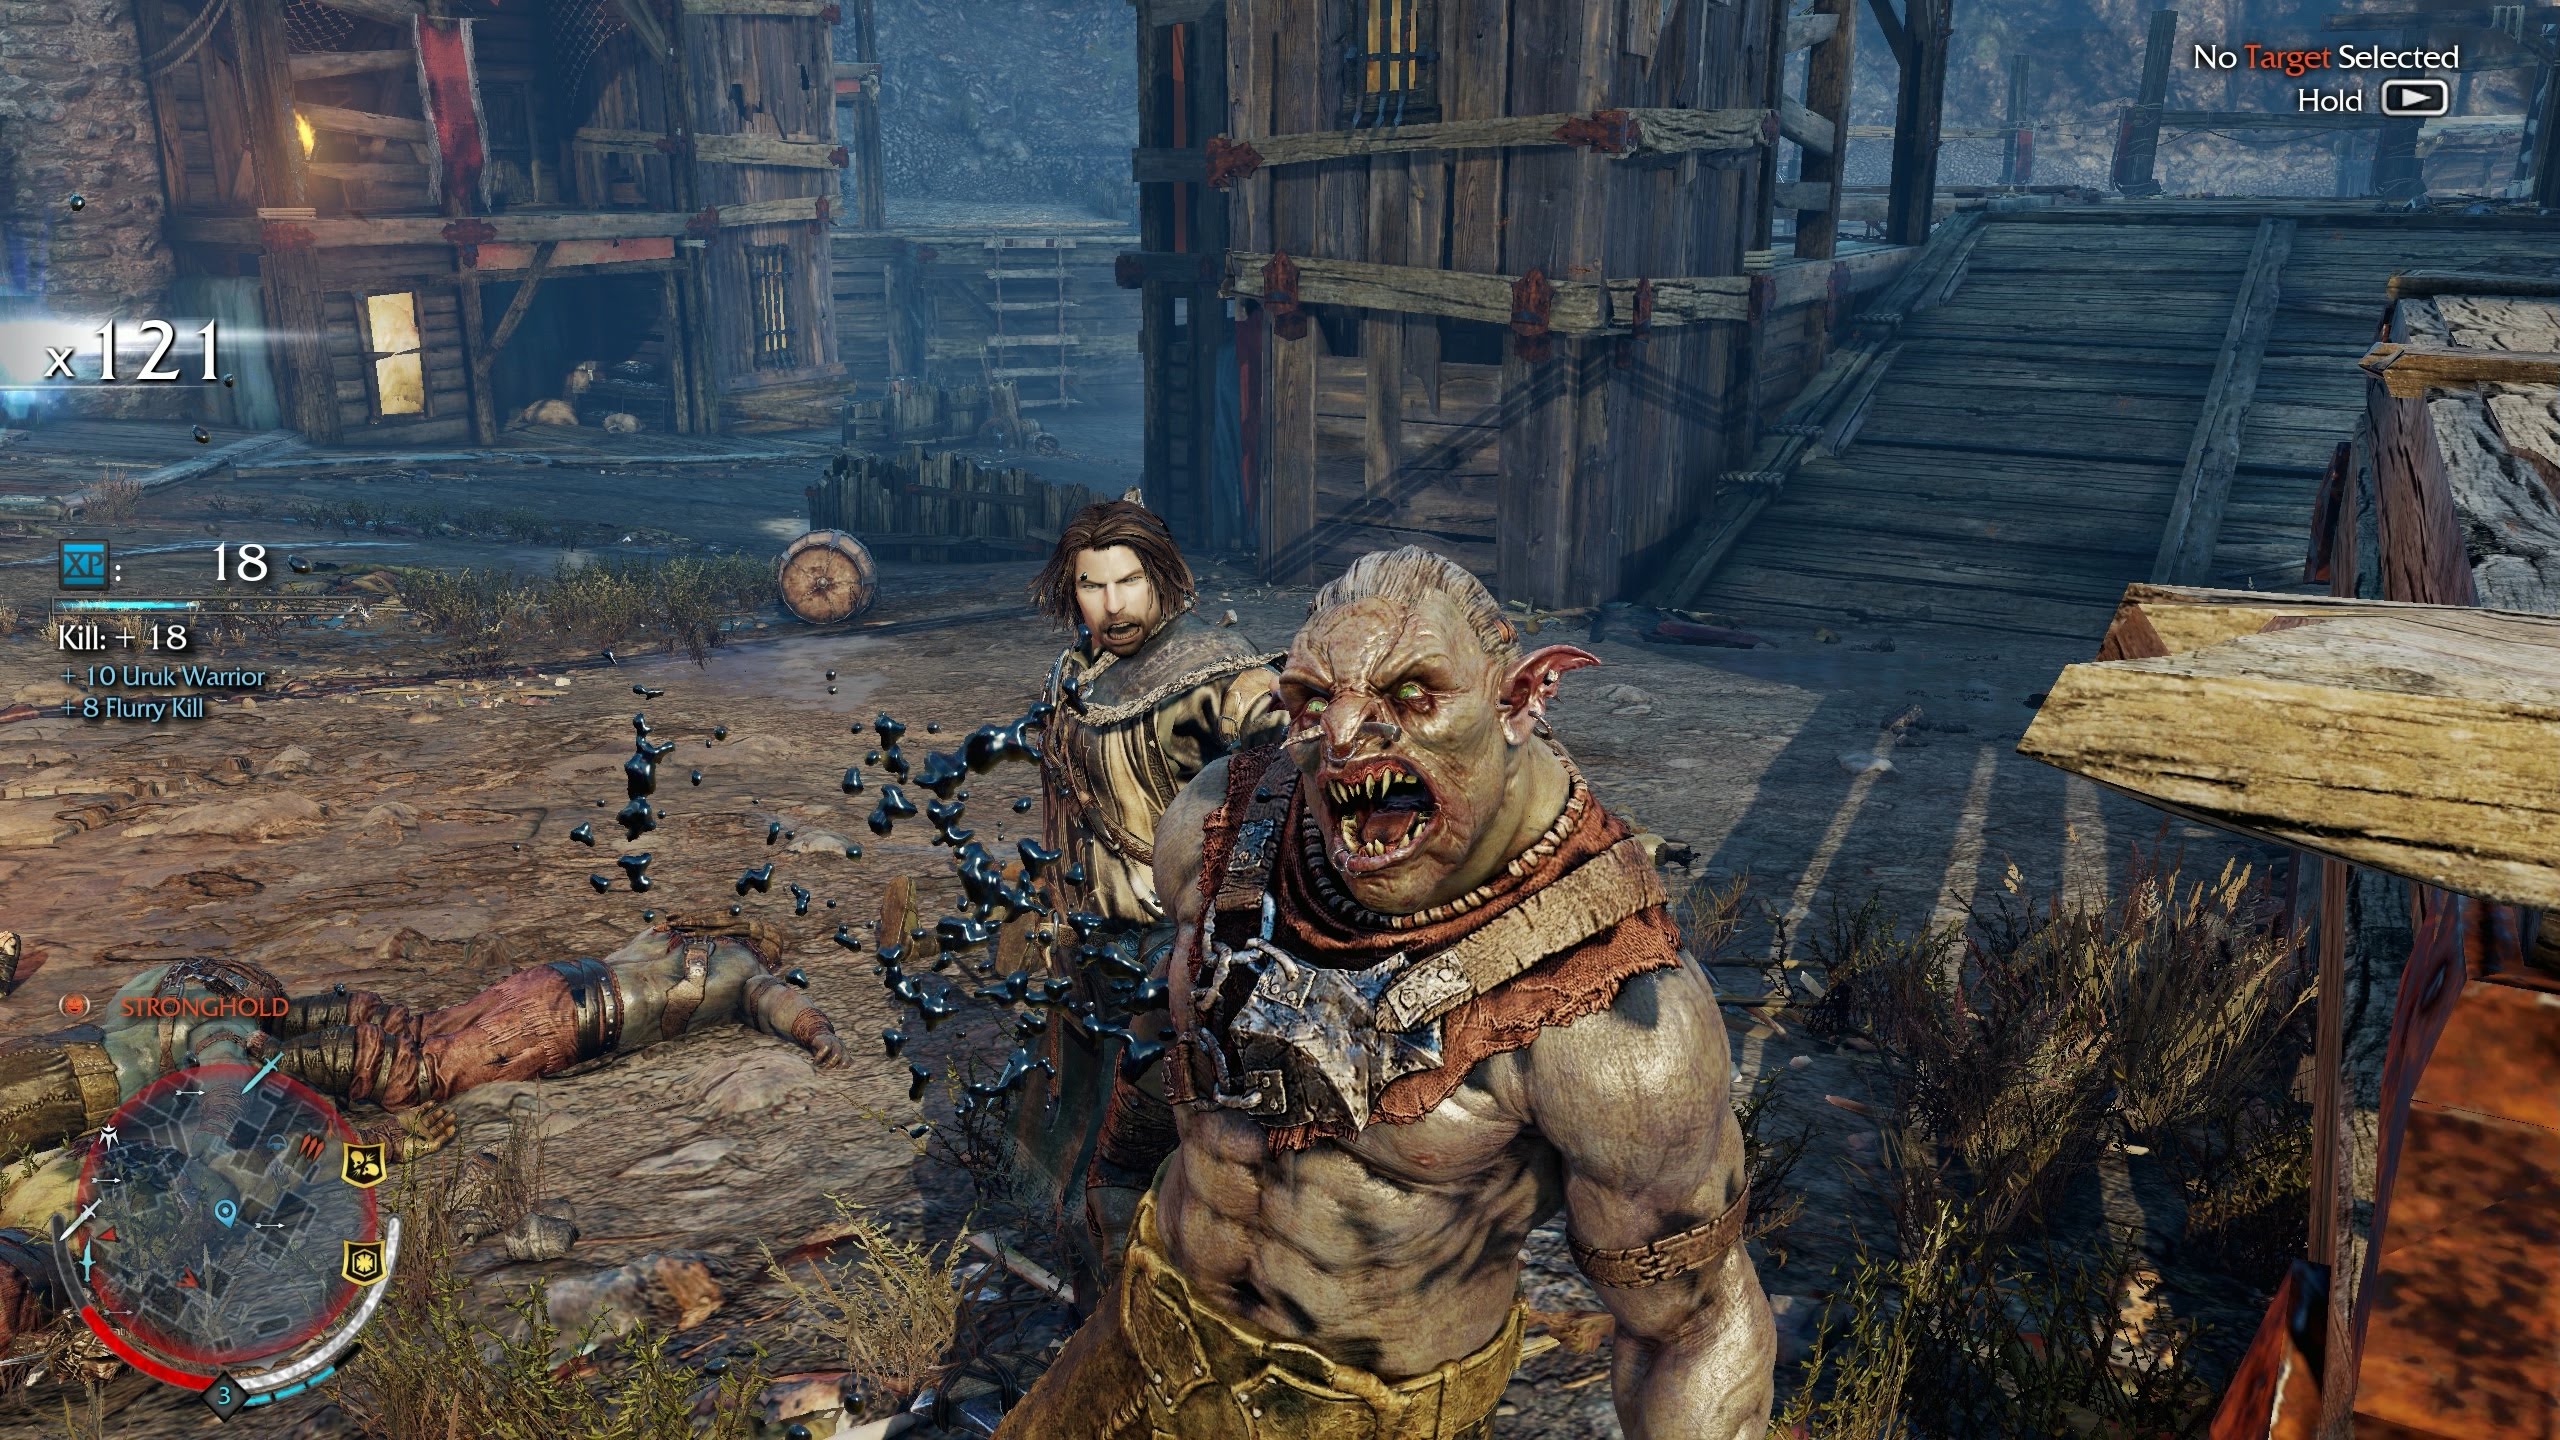 Shadow of mordor game. Middle-Earth: Shadow of Mordor. Игра Средиземье тени Мордора. Игра тени Мордора 2. Средиземье тени Мордора геймплей.